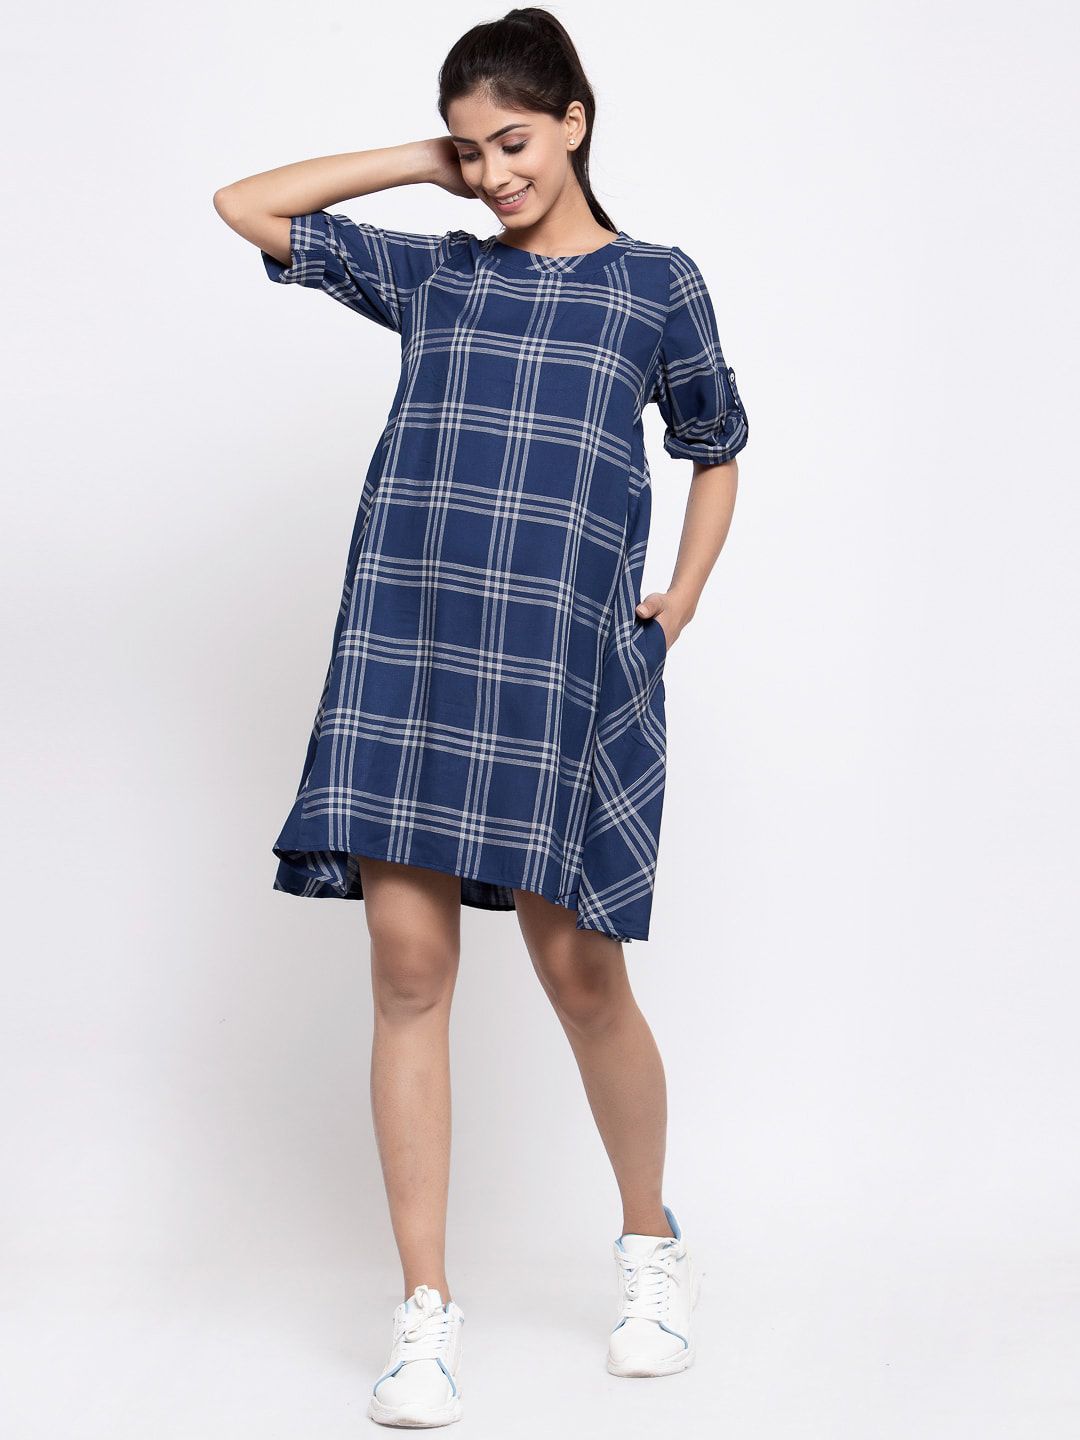 TERQUOIS Women Blue Checked A-Line Oversized Dress Price in India